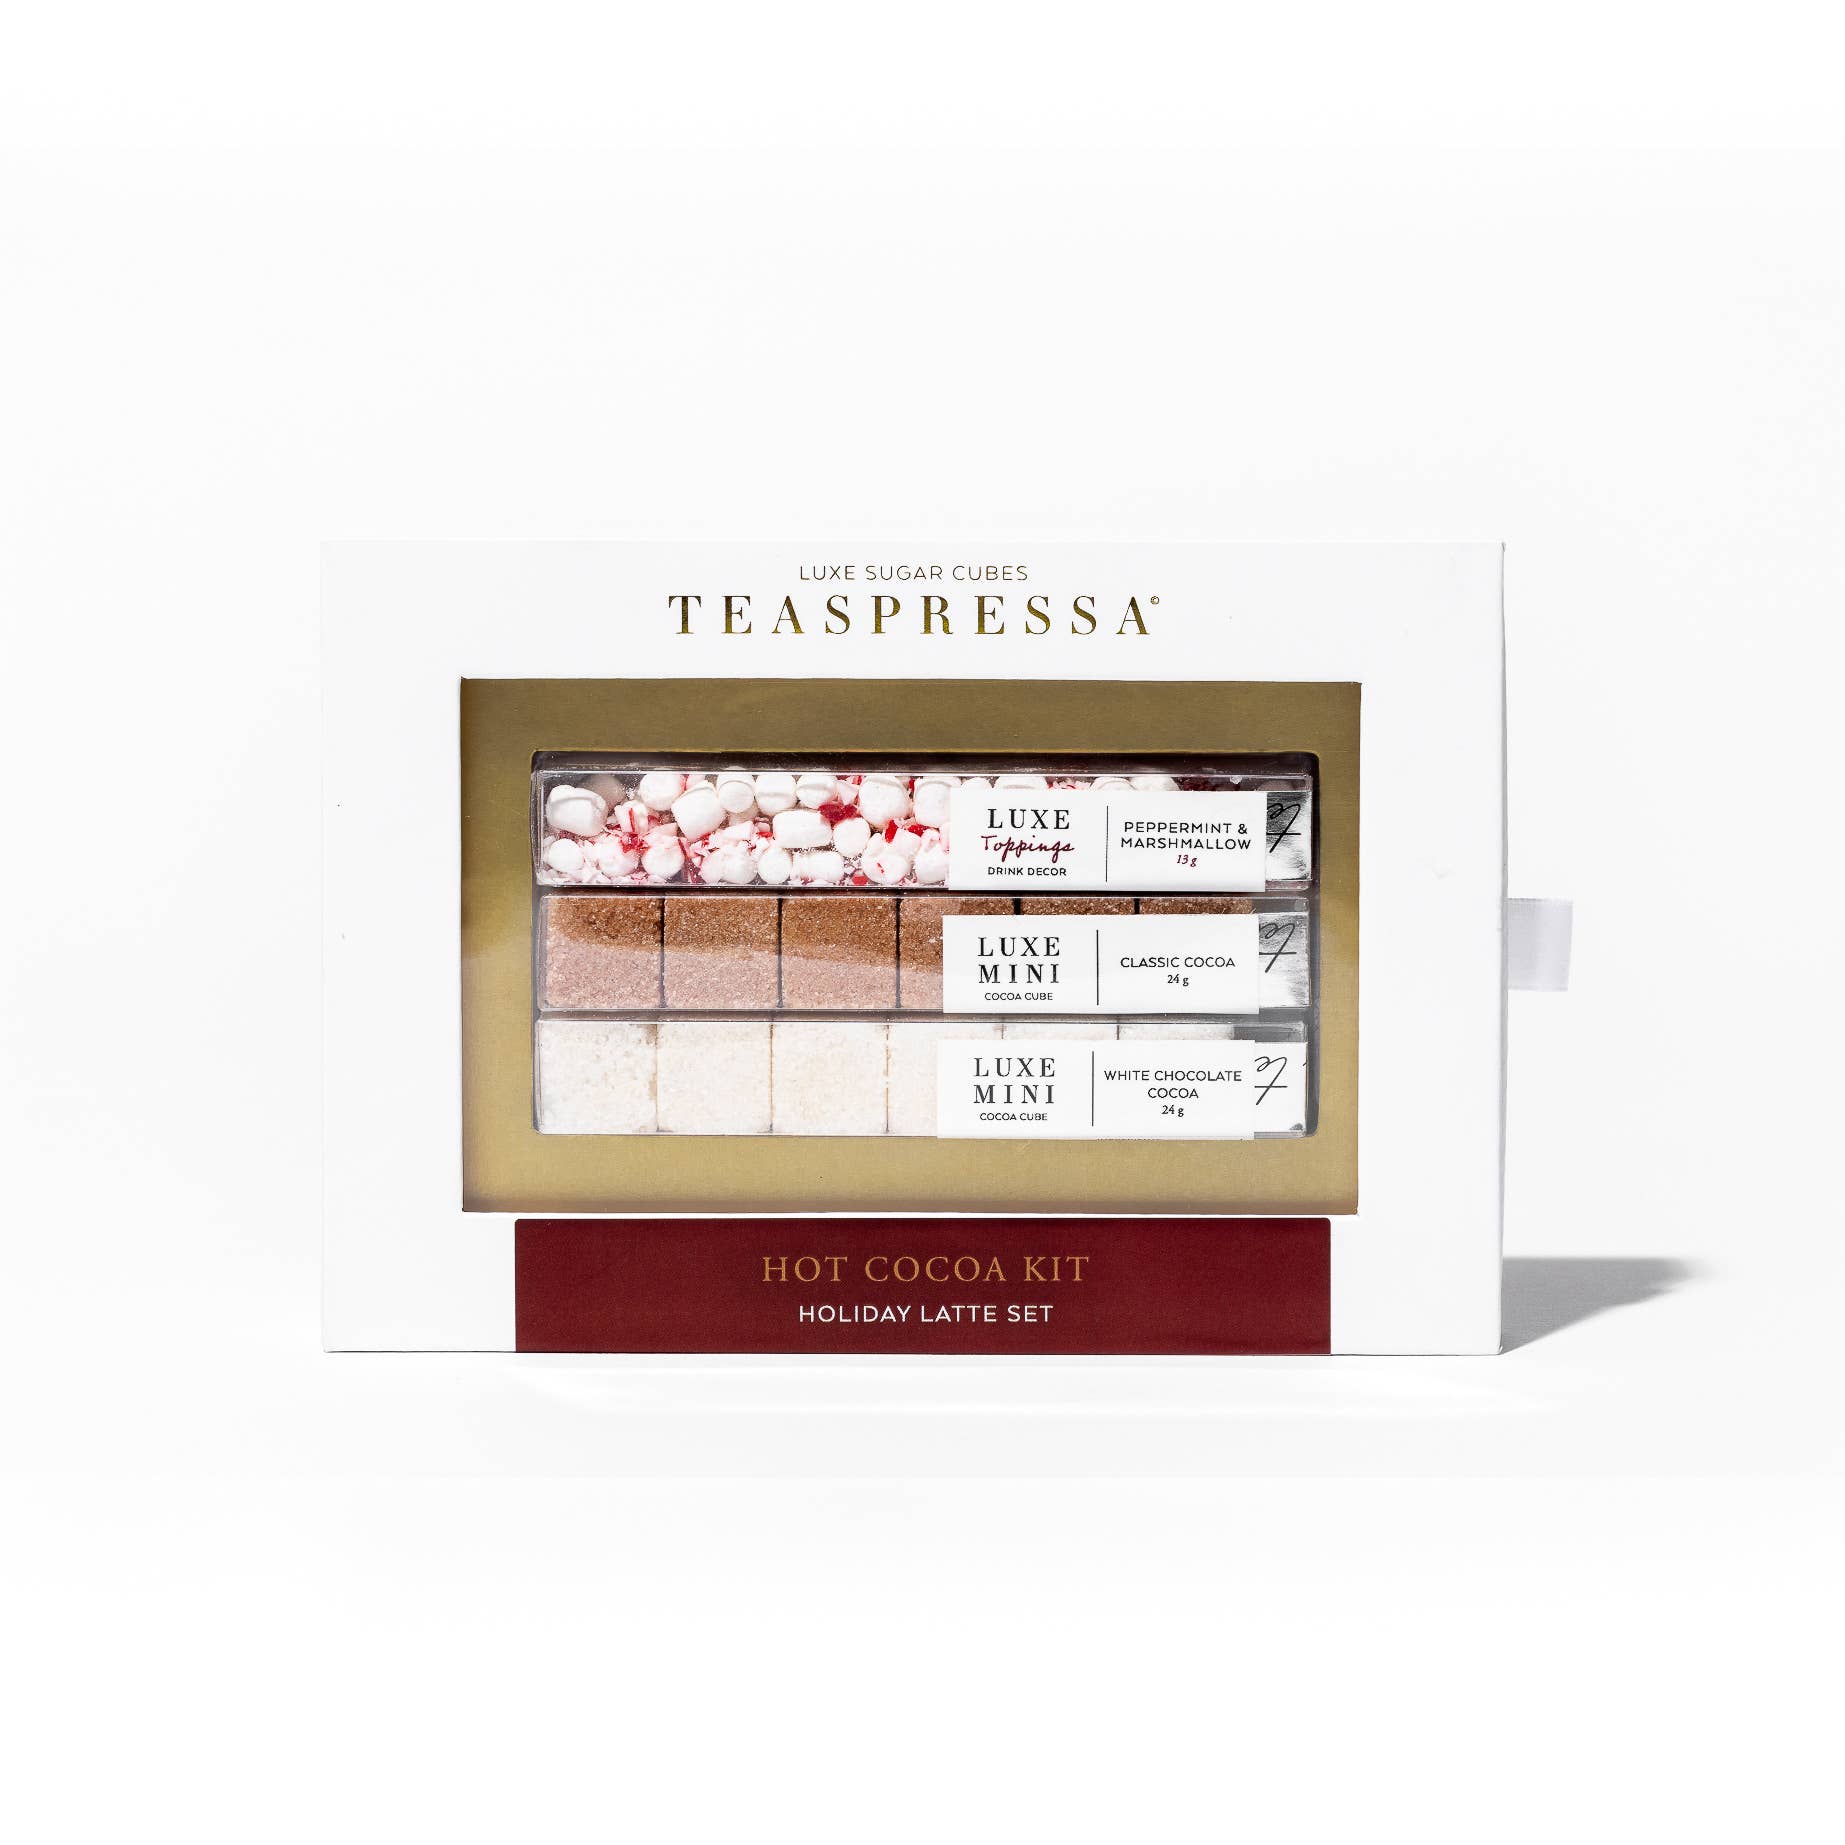 Hot Cocoa Kit by TEASPRESSA. Easy to make hot chocolate. Hot chocolate with peppermint marshmallows. Cute hot chocolate gift. Hot chocolate holiday gift